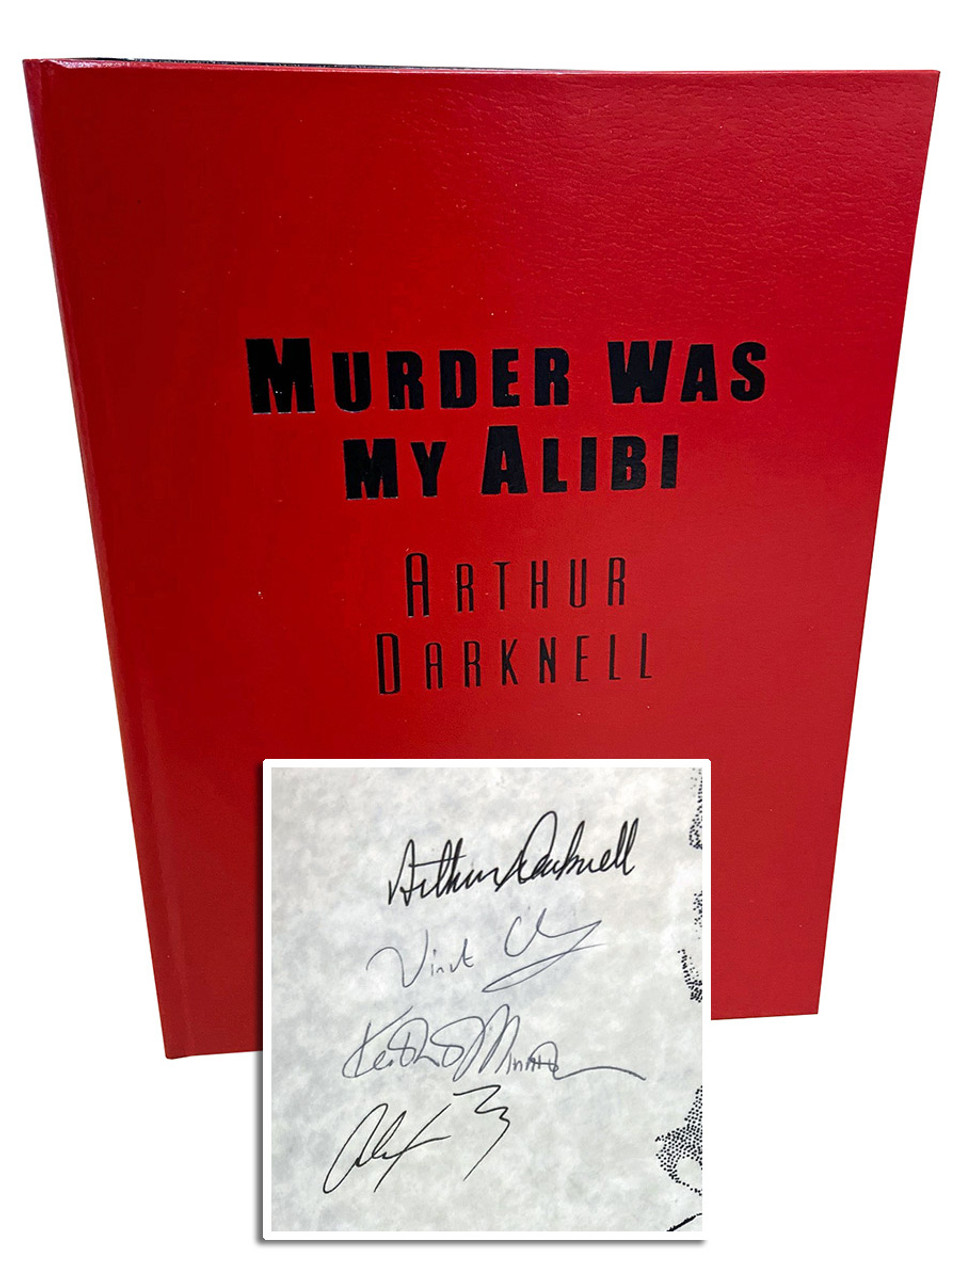 THE ARTHUR DARKNELL DOUBLE  "Murder Was My Alibi", "Loveless", "The Most Interesting Prospect" Chapbook, Signed Deluxe Lettered Edition "F" of 26 Traycased